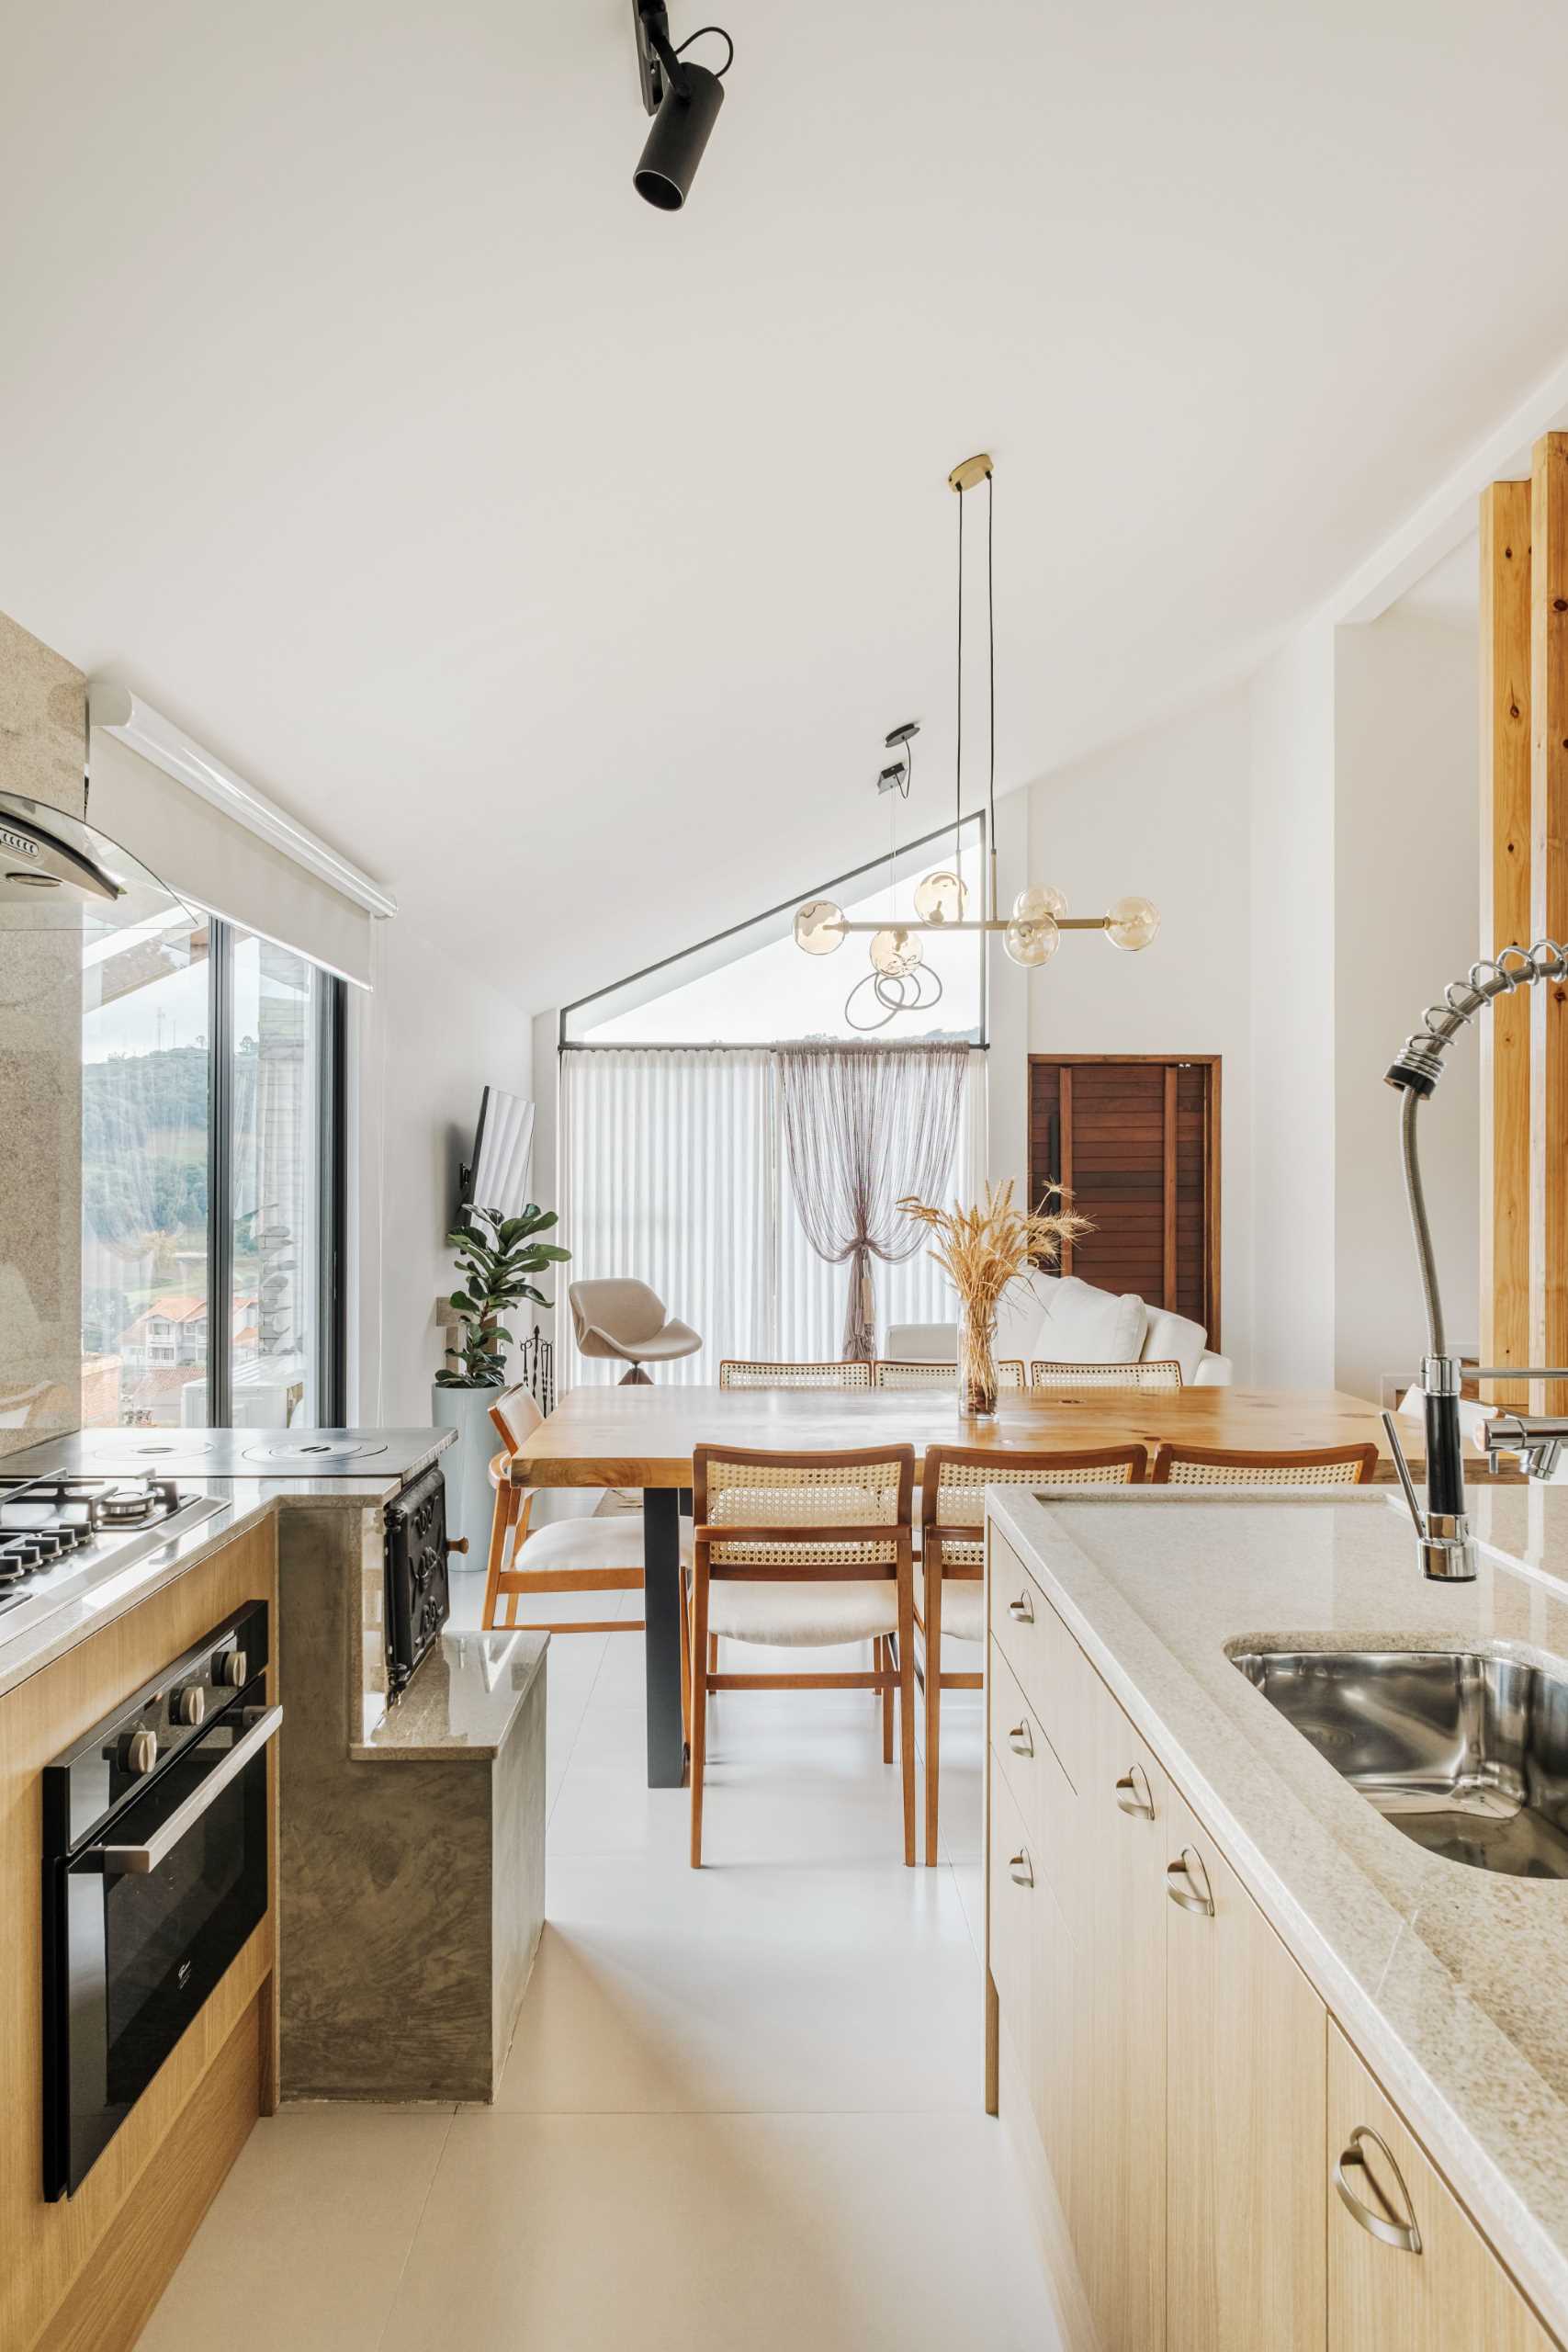 The palette of materials c،sen in this modern open-plan interior, unites wood, linen, and burnt cement, which are all enhanced by the white walls and ceiling.